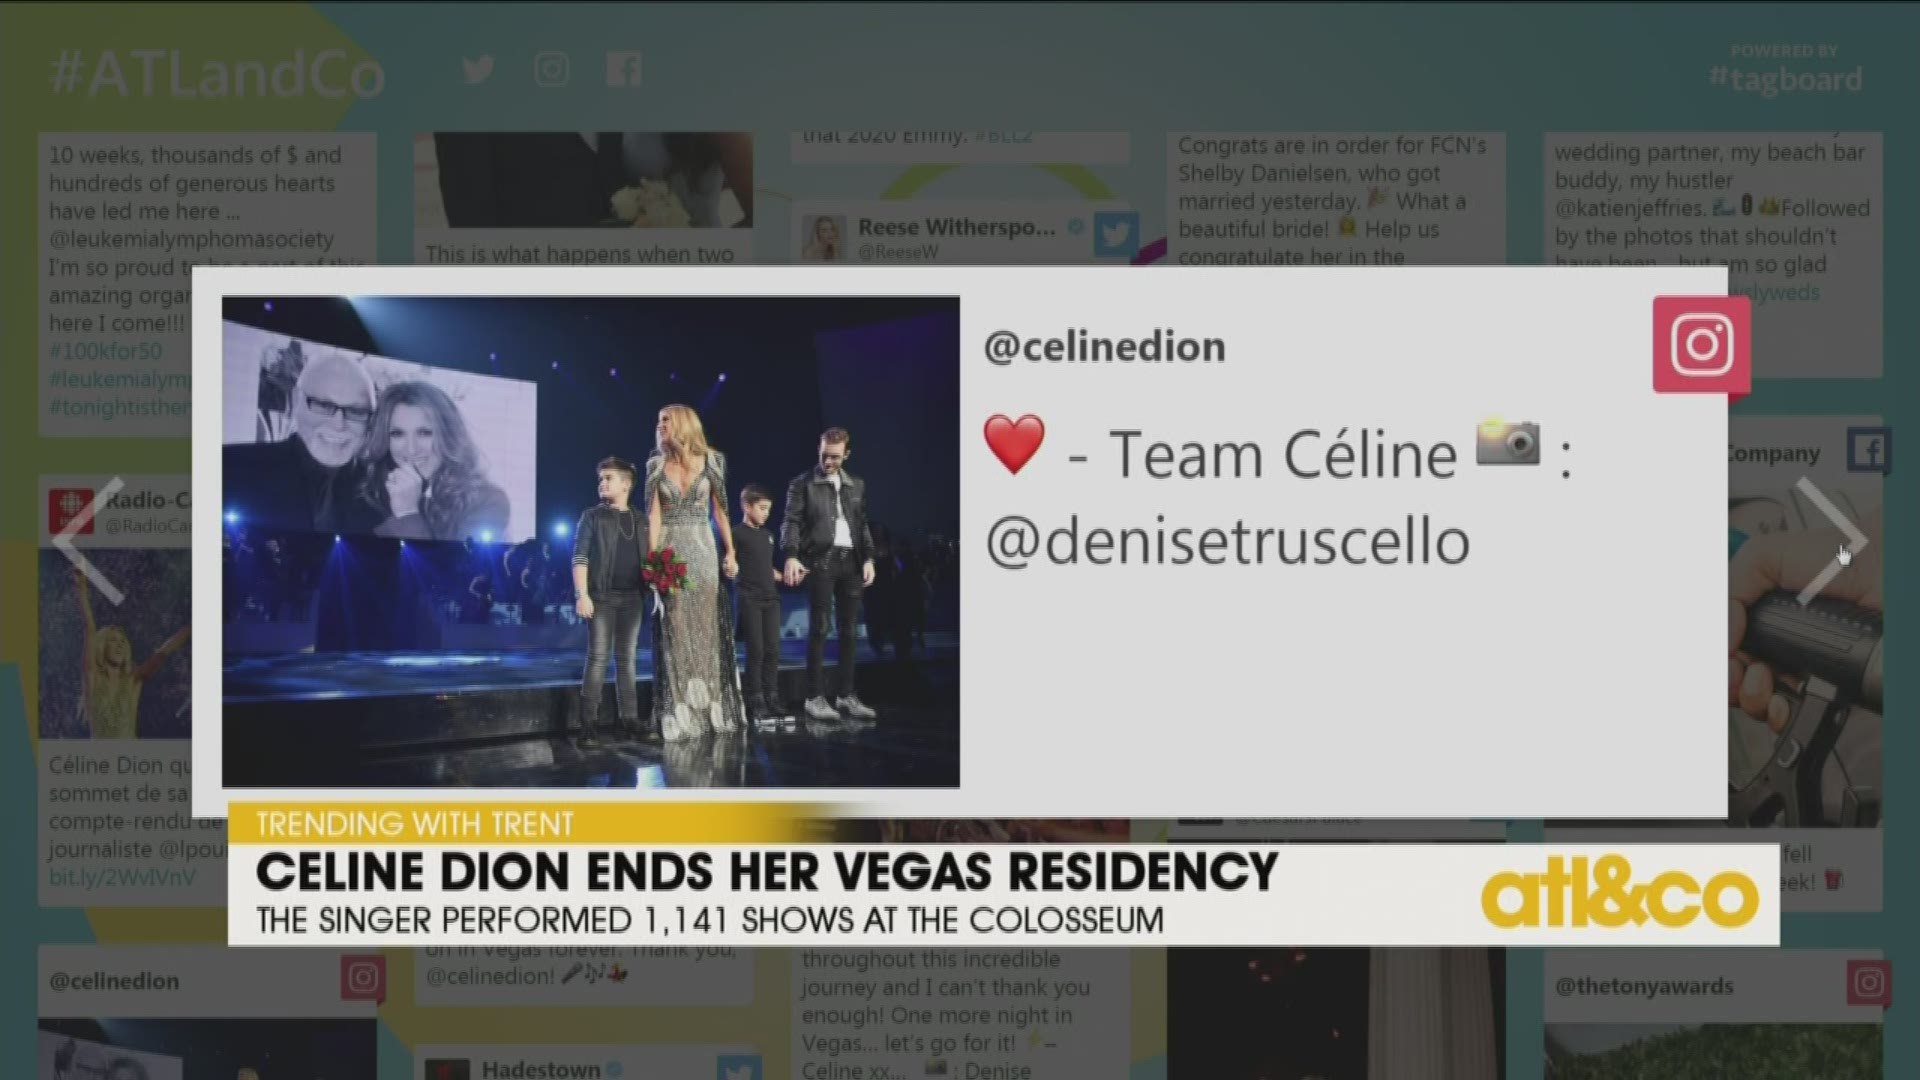 Iconic superstar Celine Dion closes out her Las Vegas residency after 16 years at the Colosseum.